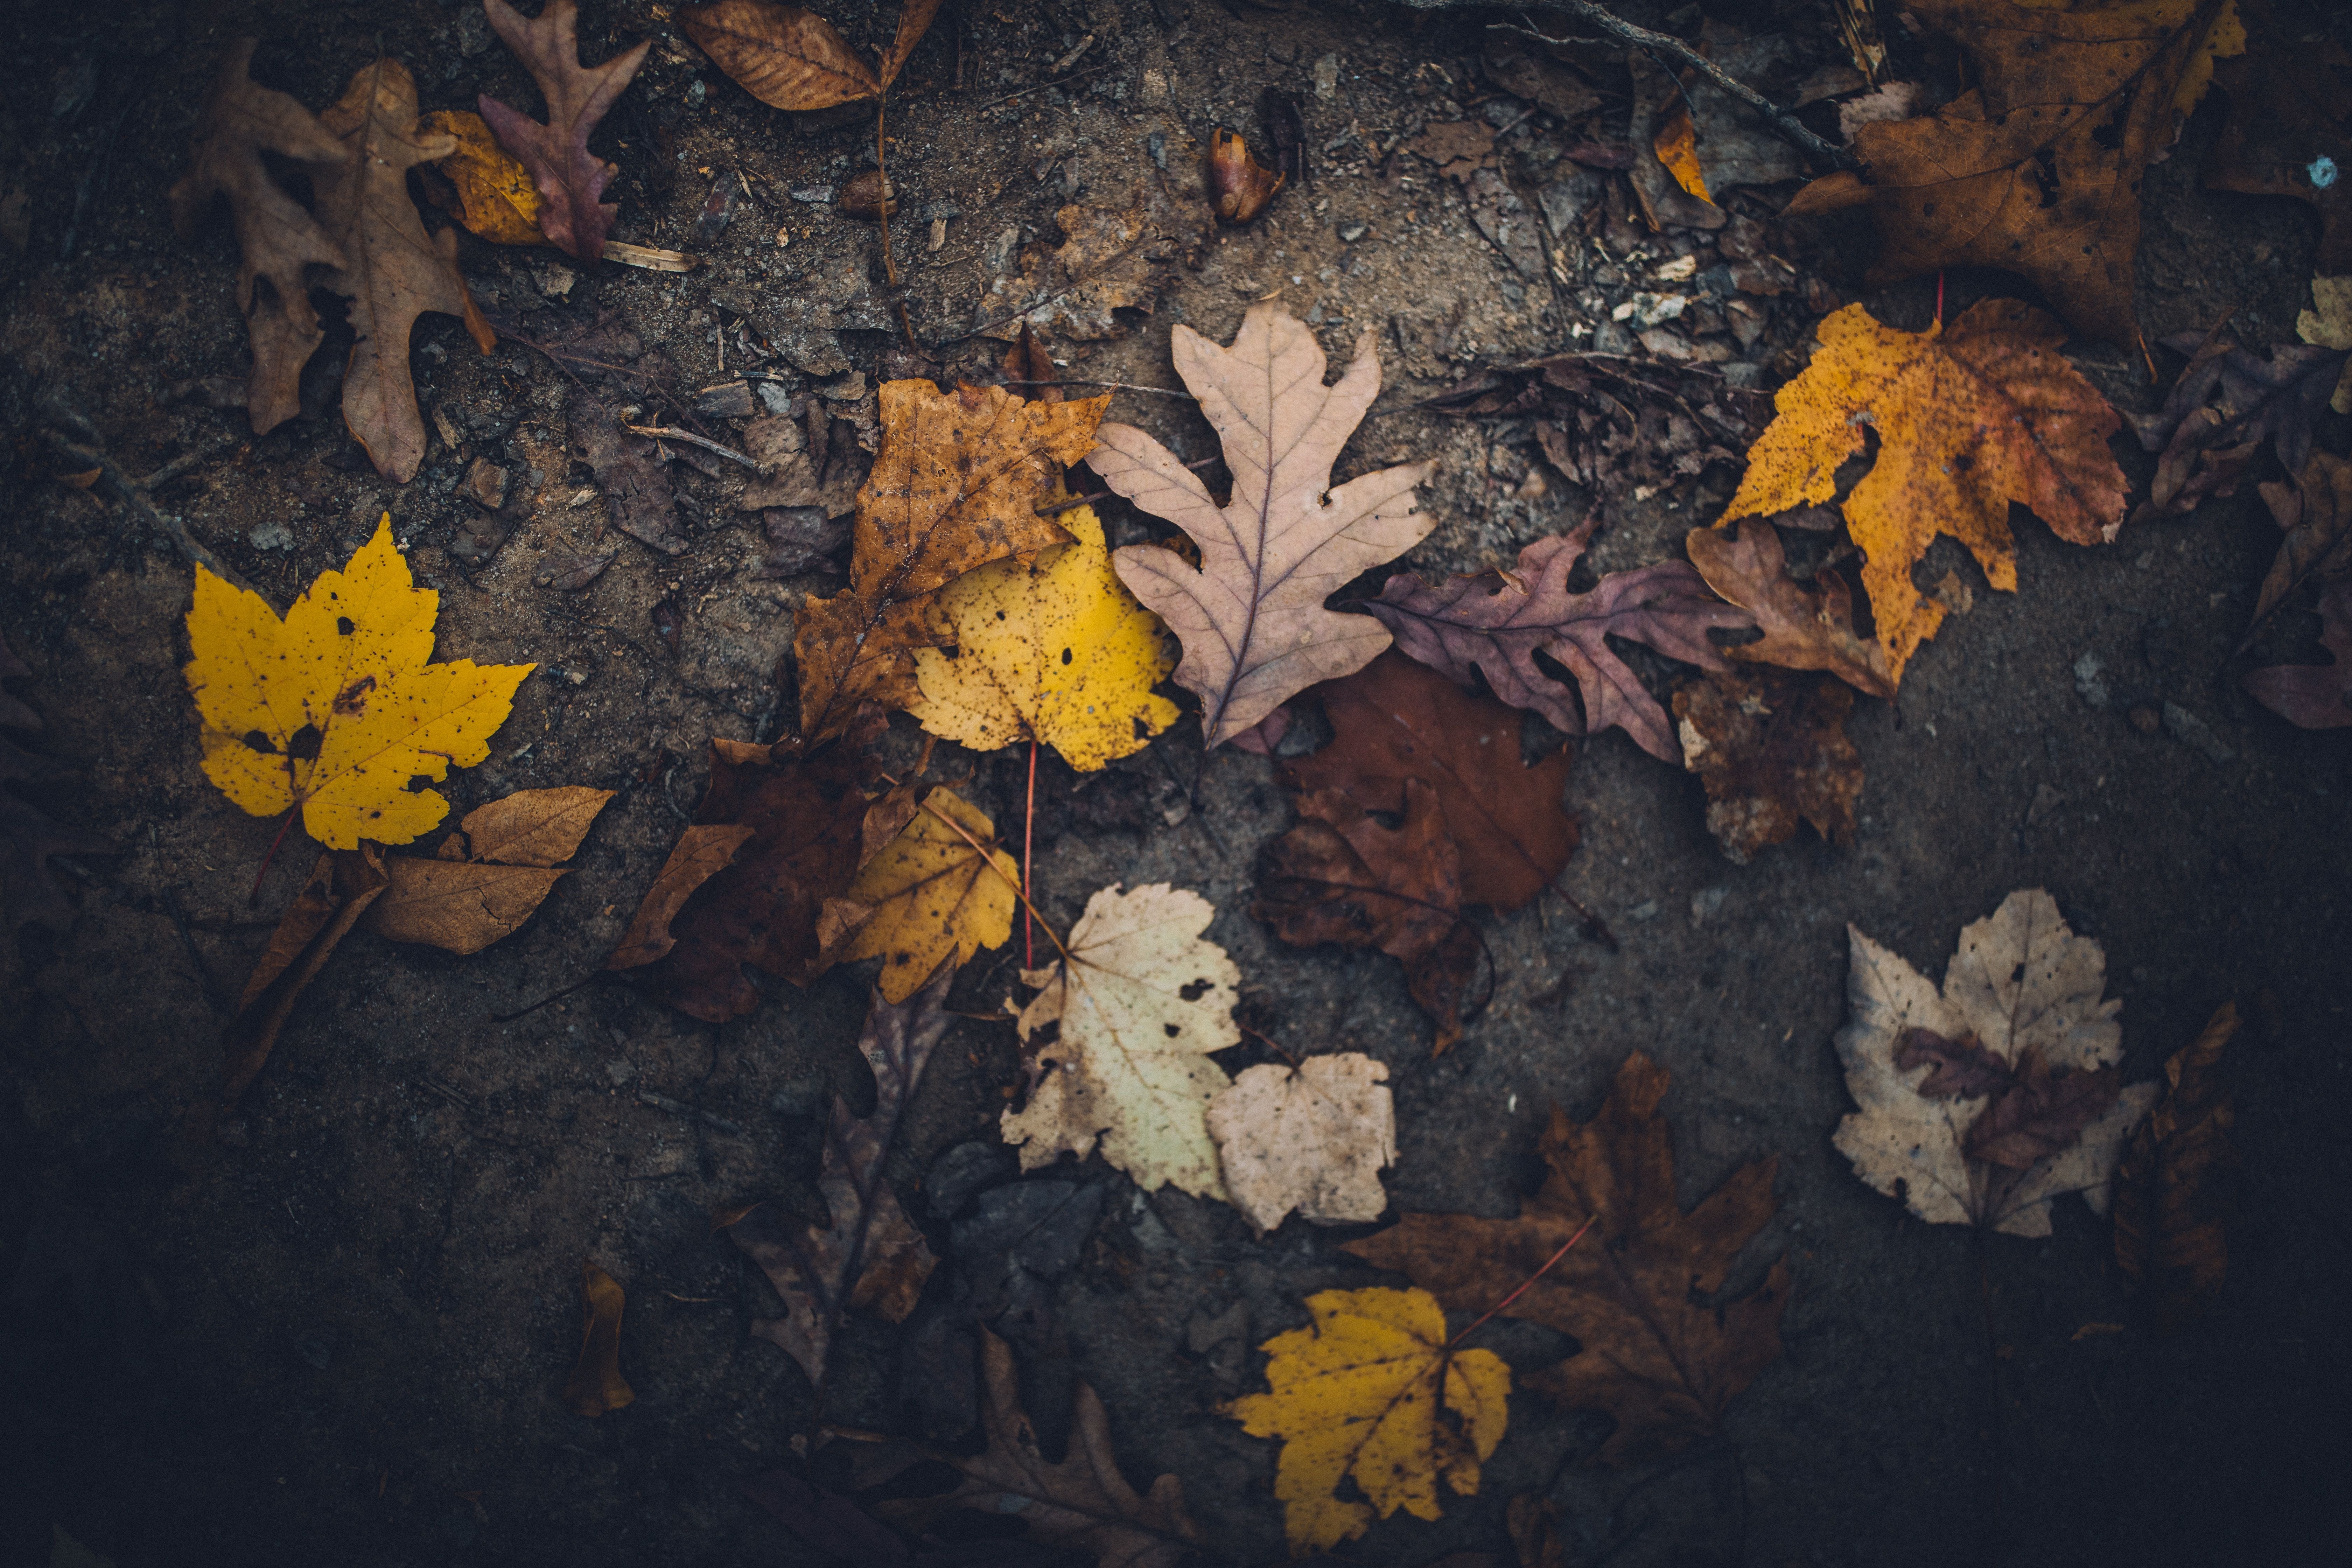 6720x4480 #leaf, #brown, #fall, #leafe, #gray, #Free , #background, #autumn, #dark, #ground, #leaves, #wallpaper, #moody, #yellow, #soil, #gravel, #mood. Mocah HD Wallpaper